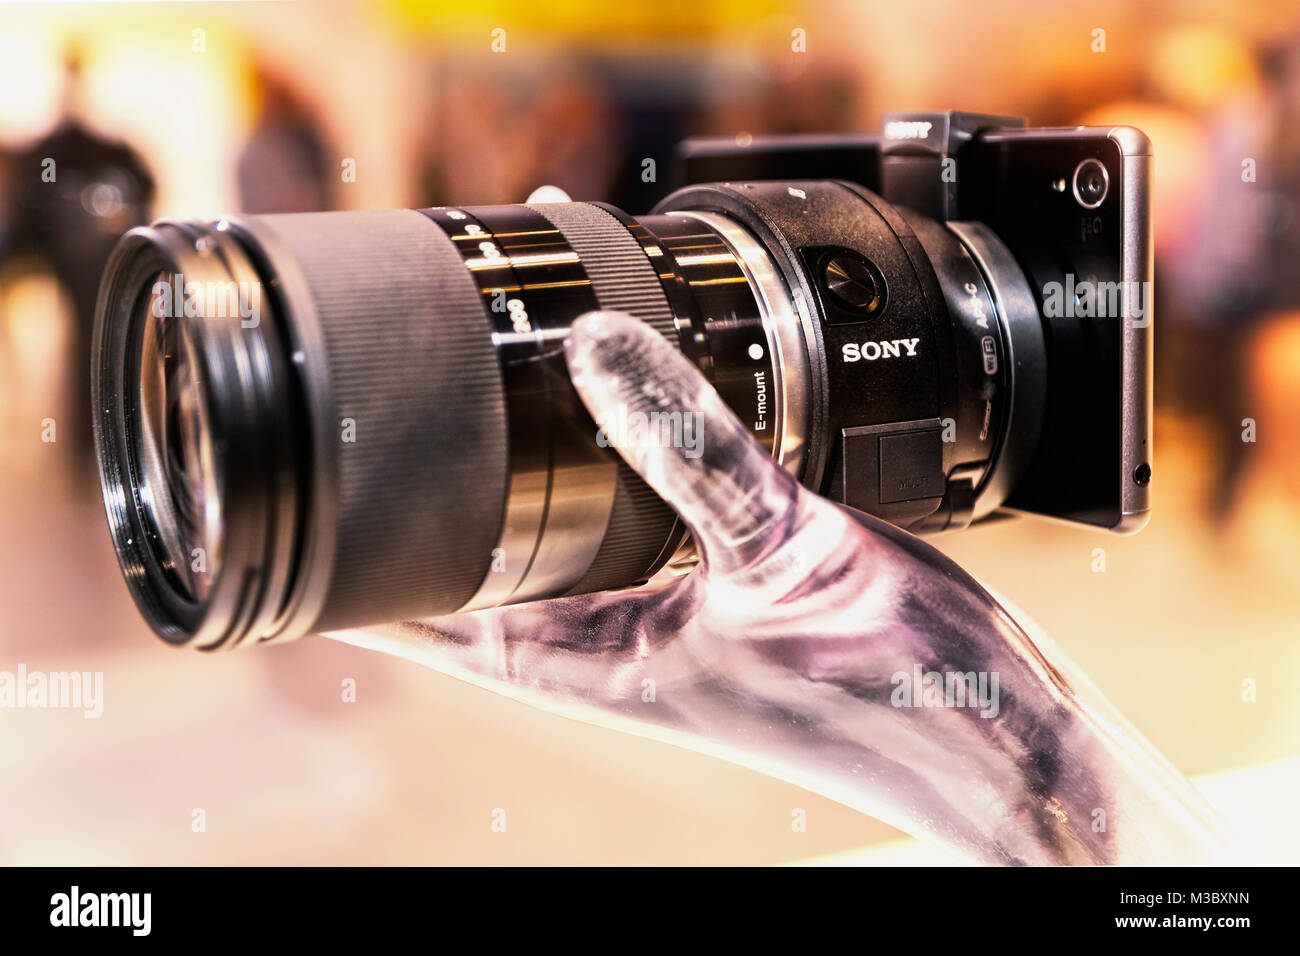 Sony xperia z3 hi-res stock photography and images - Alamy